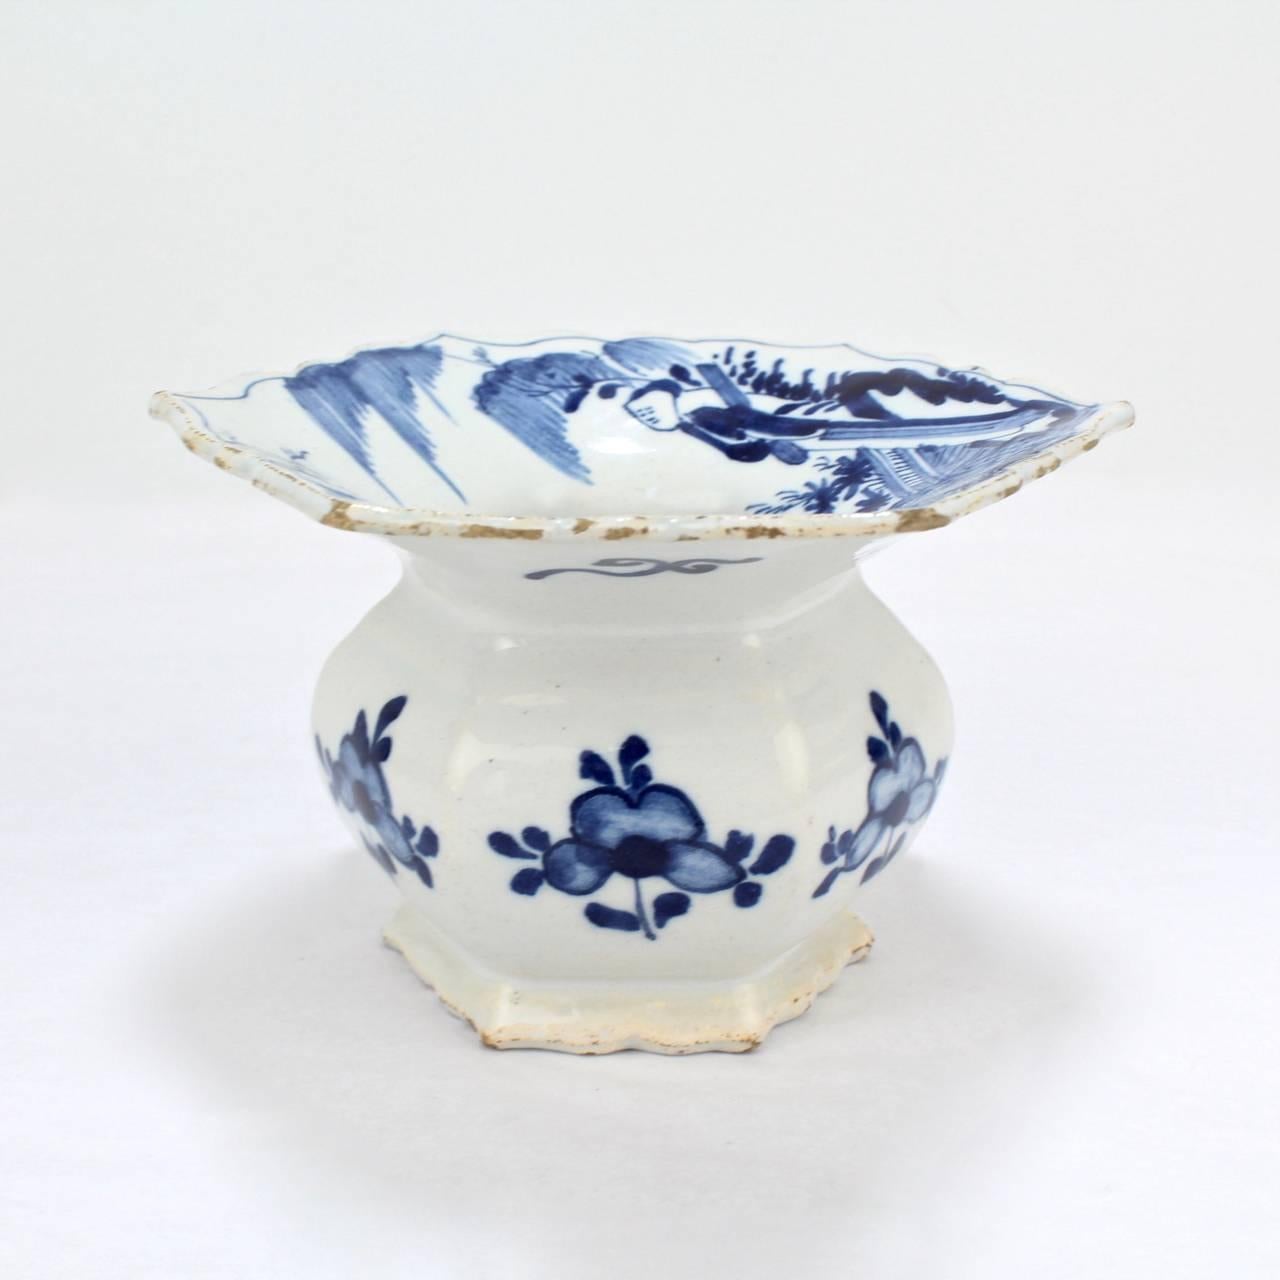 A very fine 18th century Dutch delft pottery spittoon. 

Decorated in blue with flowers to the sides and chinoiserie decoration to the top.

Measures: Diameter circa 4 3/4 in.

Provenance: From the estate of the prominent Lucas family of